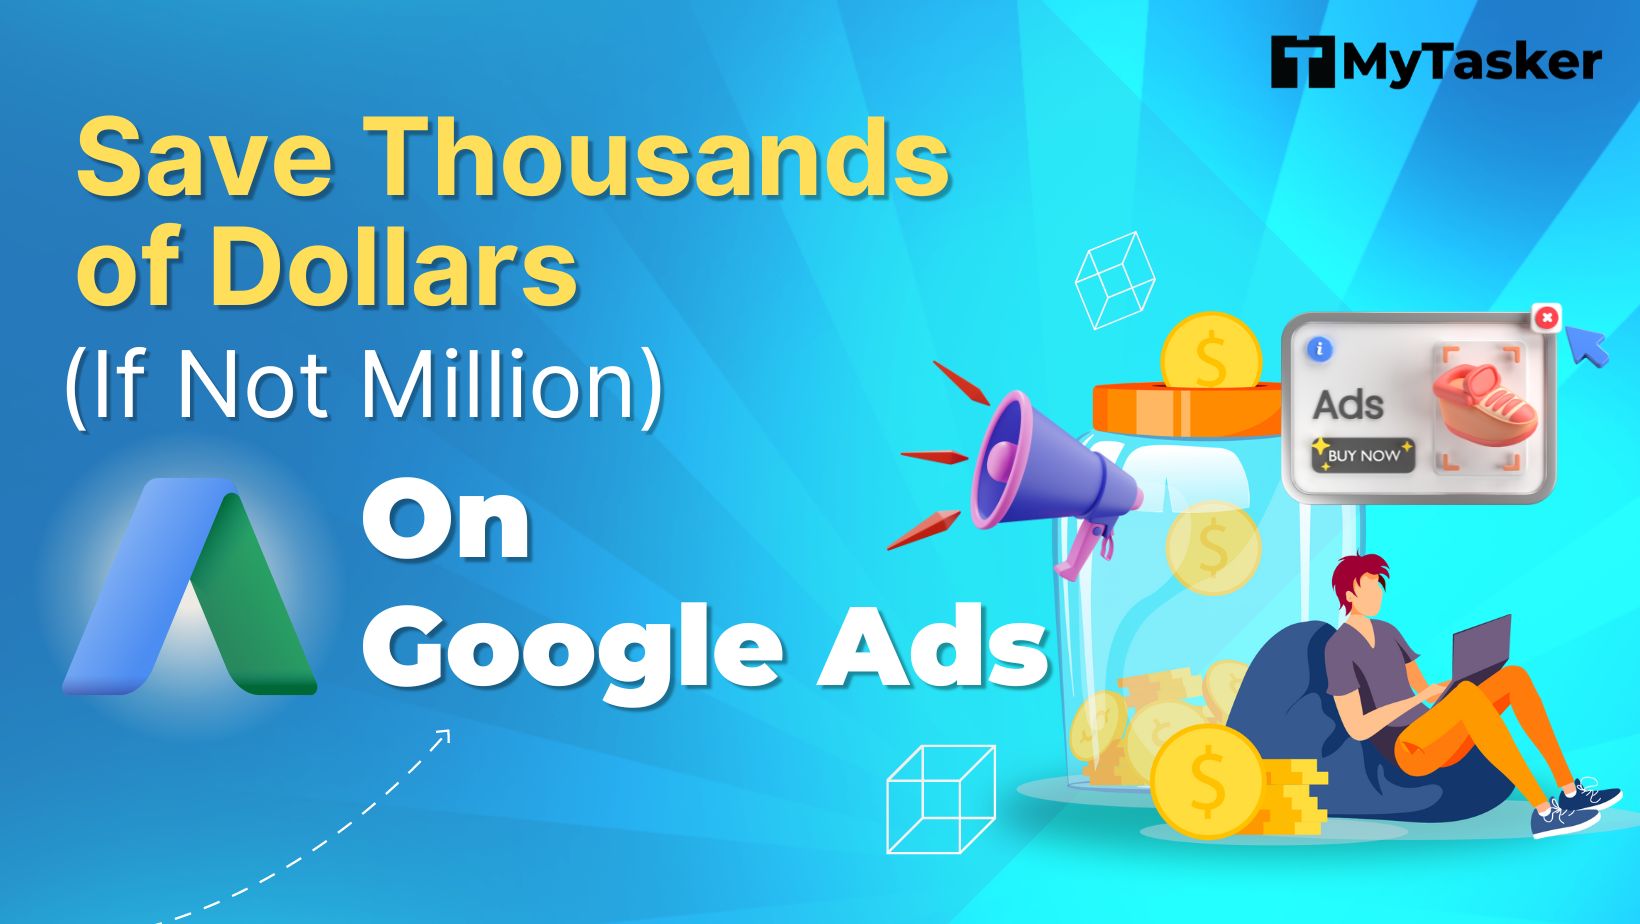 Save Thousands of Dollars (If Not Million) On Google Ads